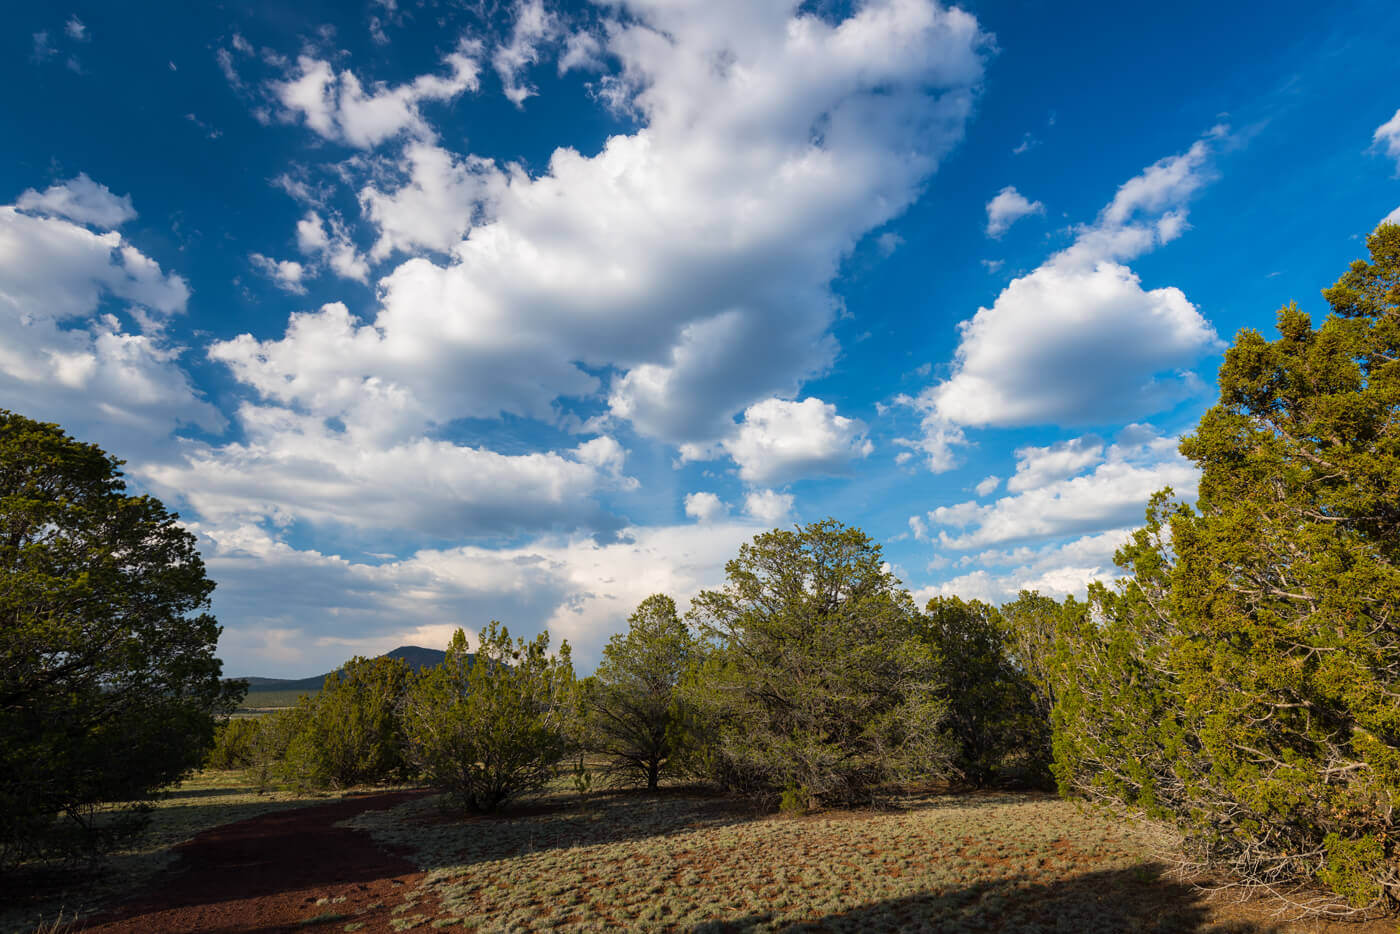 Kaibab High beneath a blue sky and white clouds with wooded ranchland featured